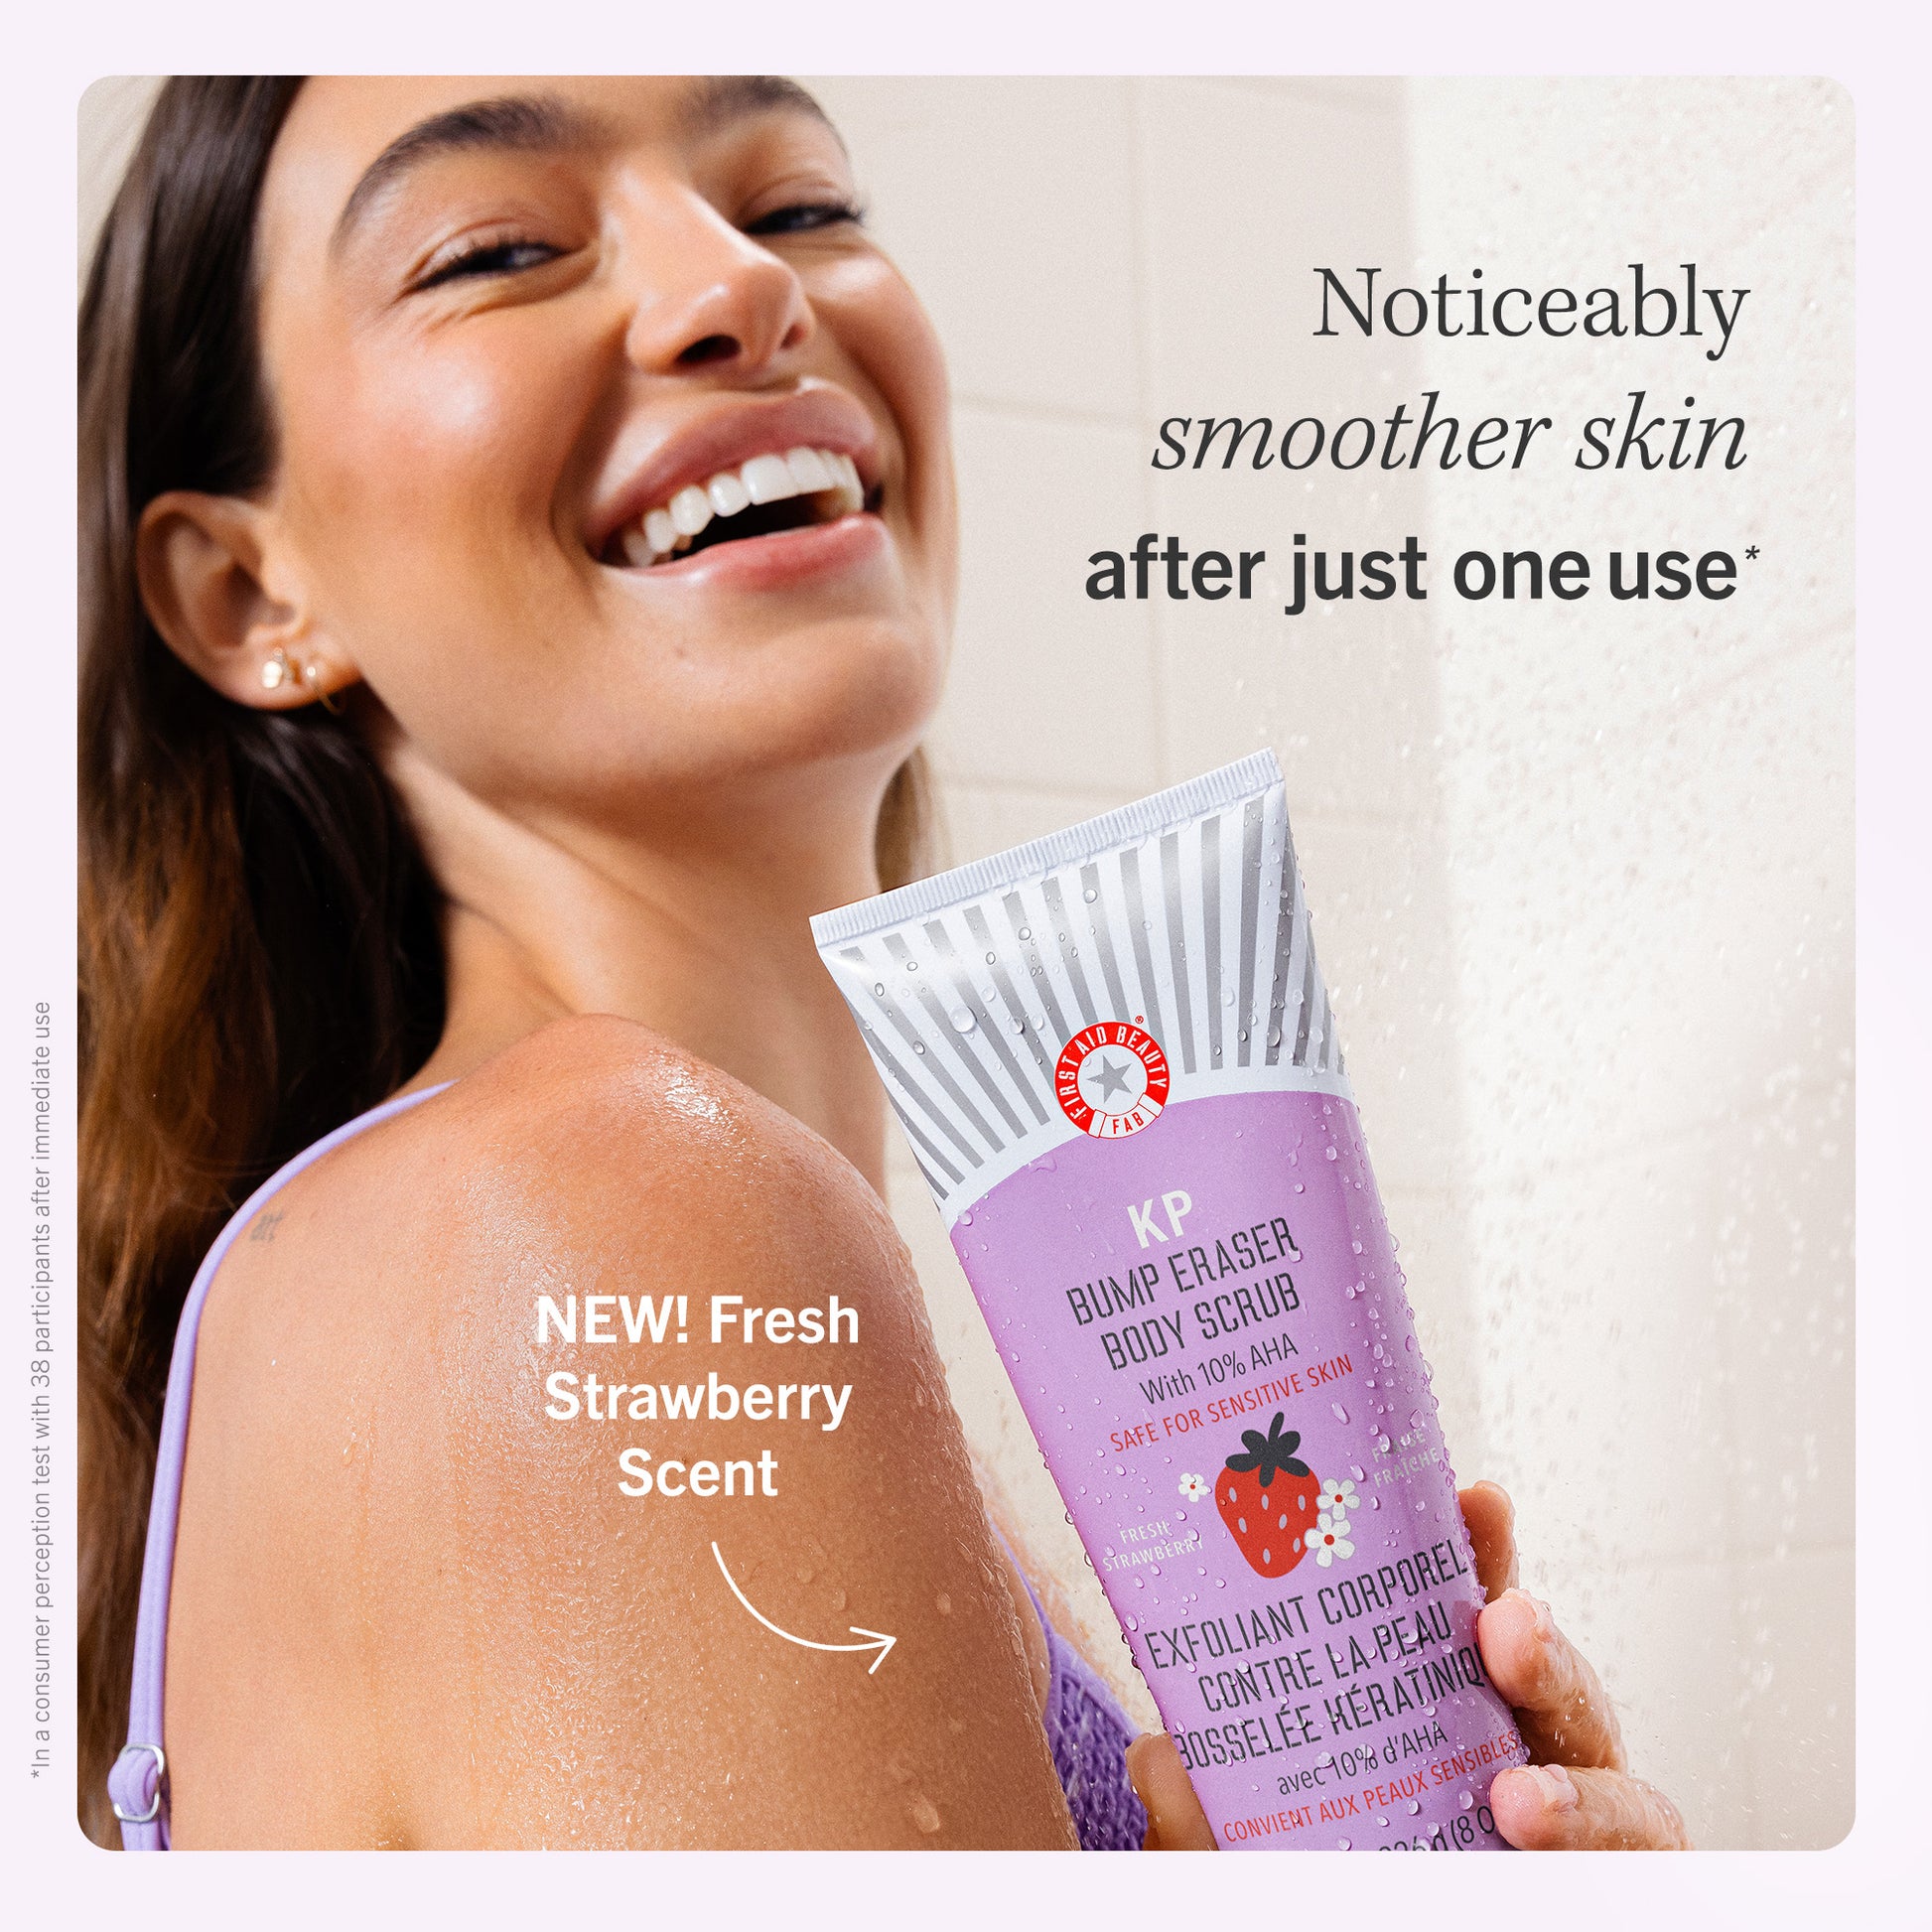 Model holding New Fresh Strawberry Scent KP Bump Eraser Body Scrub.  Noticeably smoother skin after just one use.